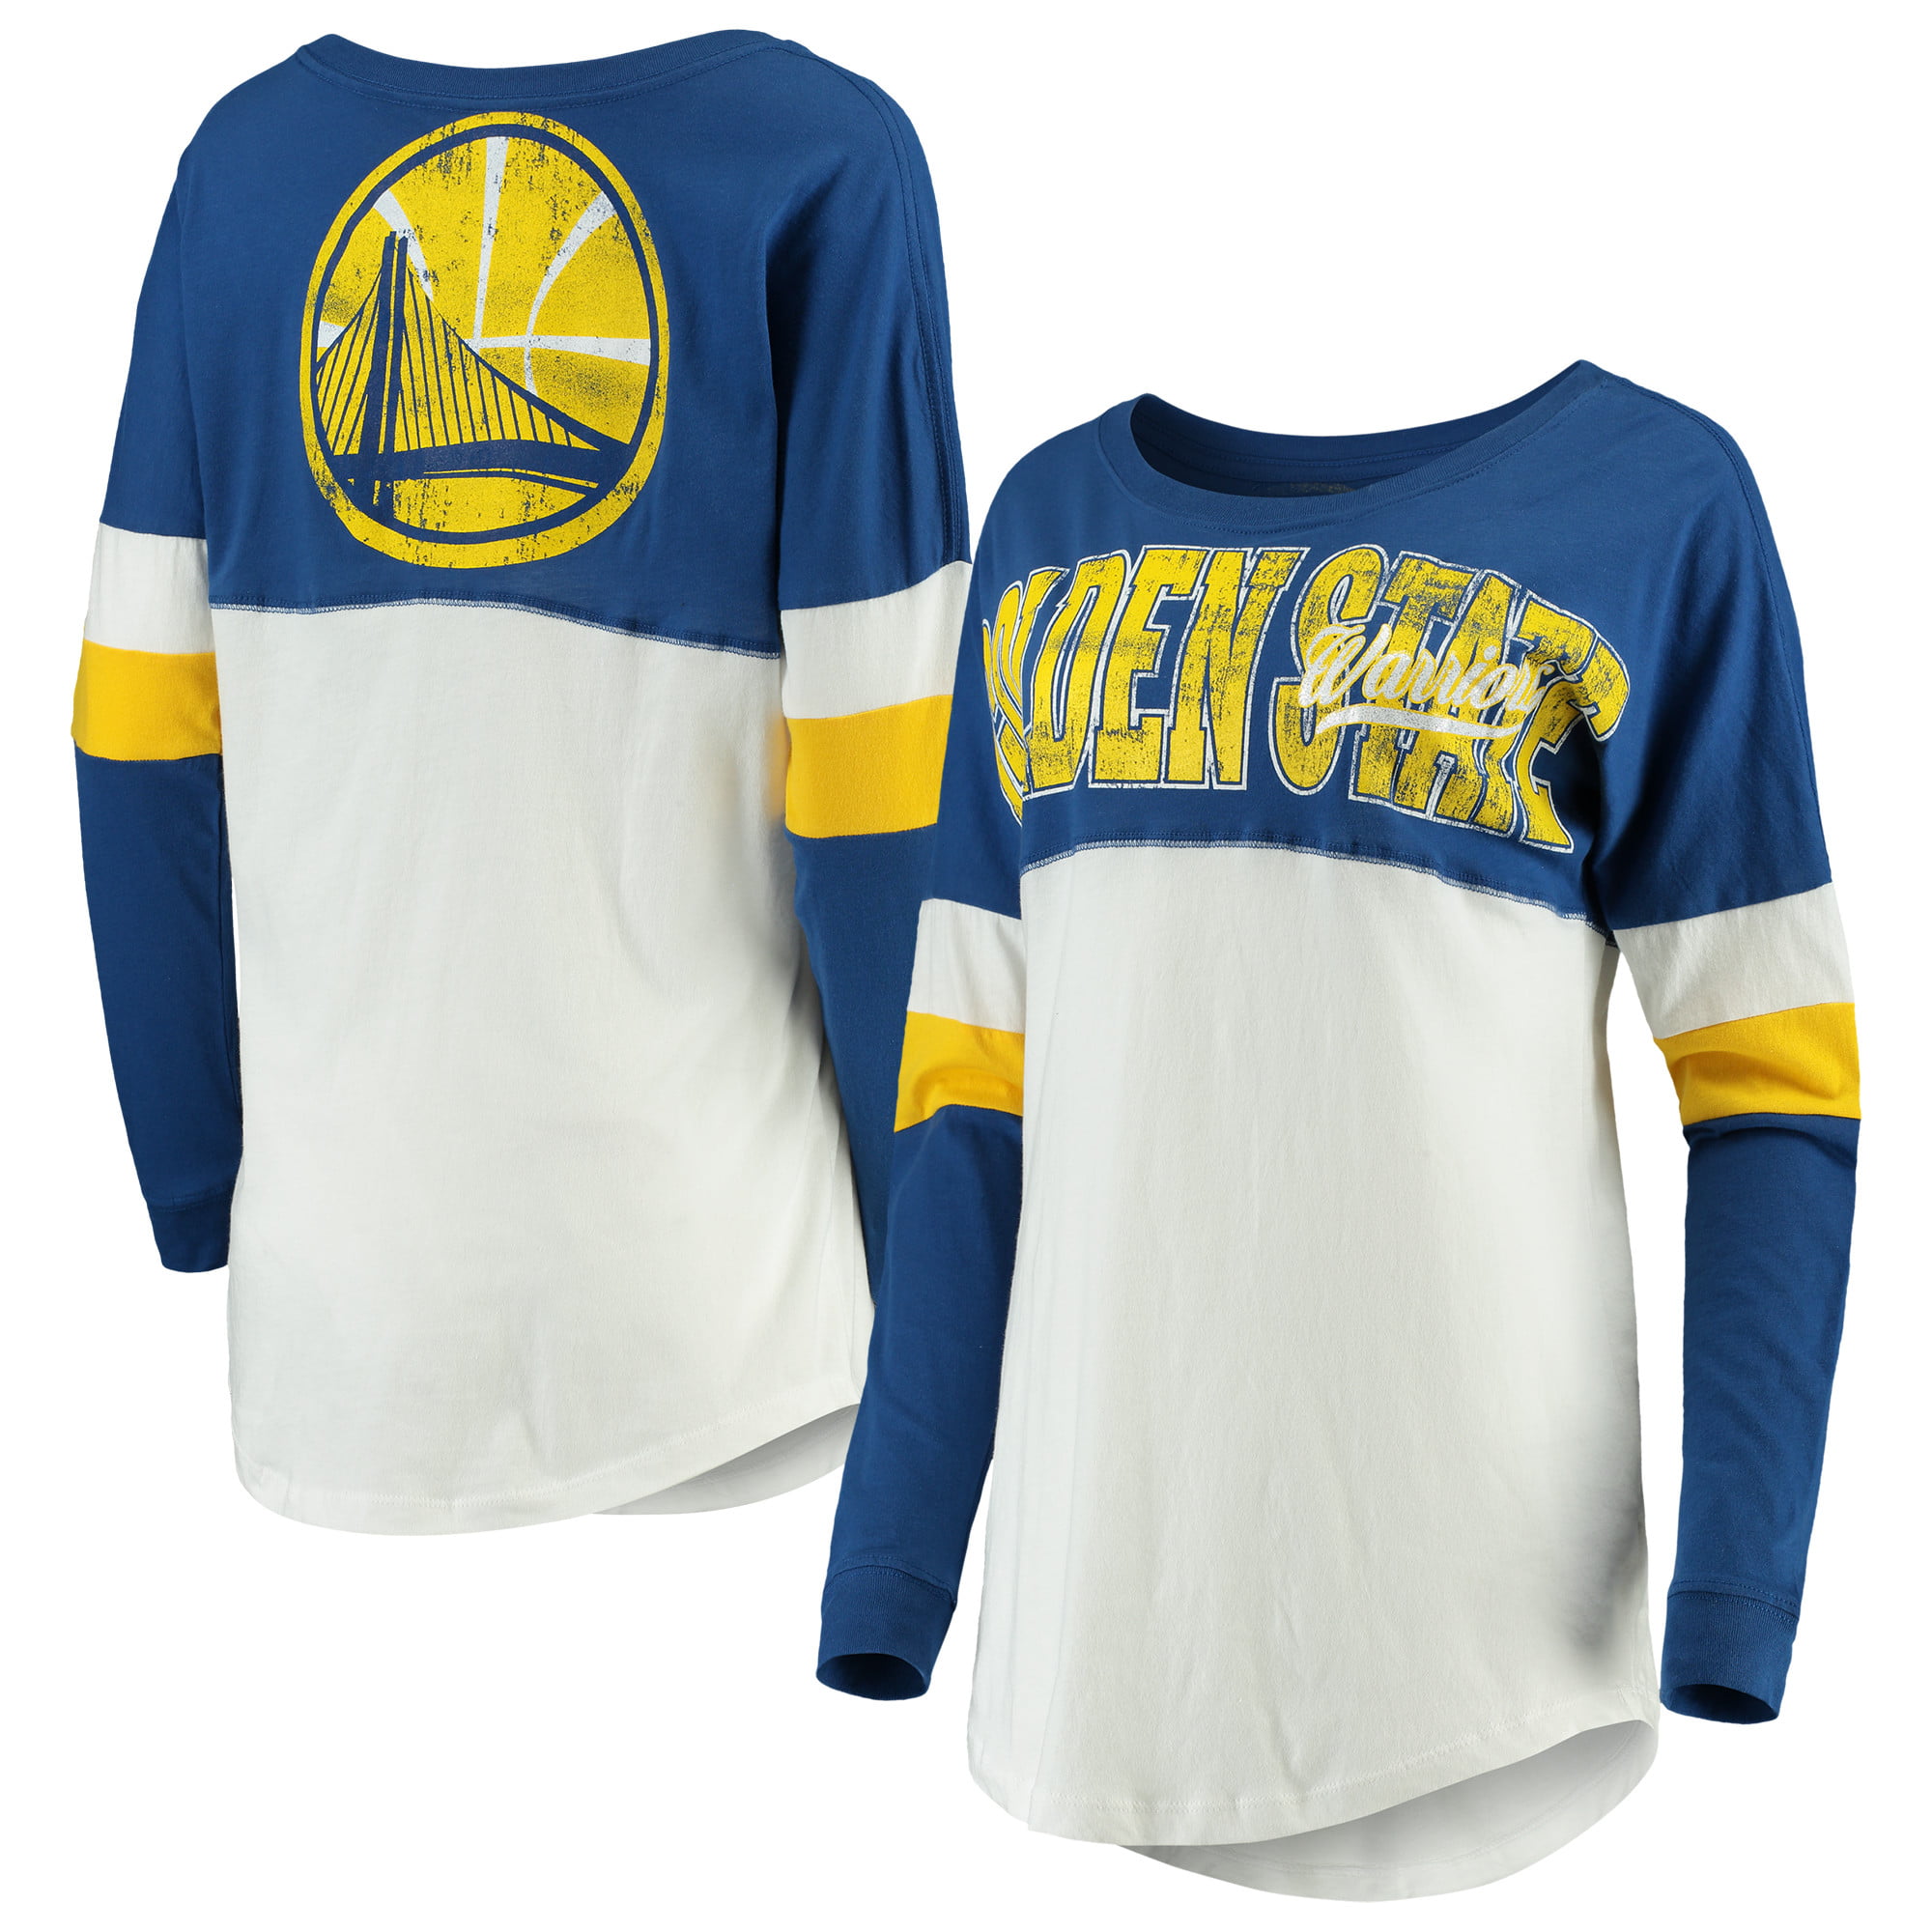 warriors new jersey Cheaper Than Retail Price> Buy Clothing ...